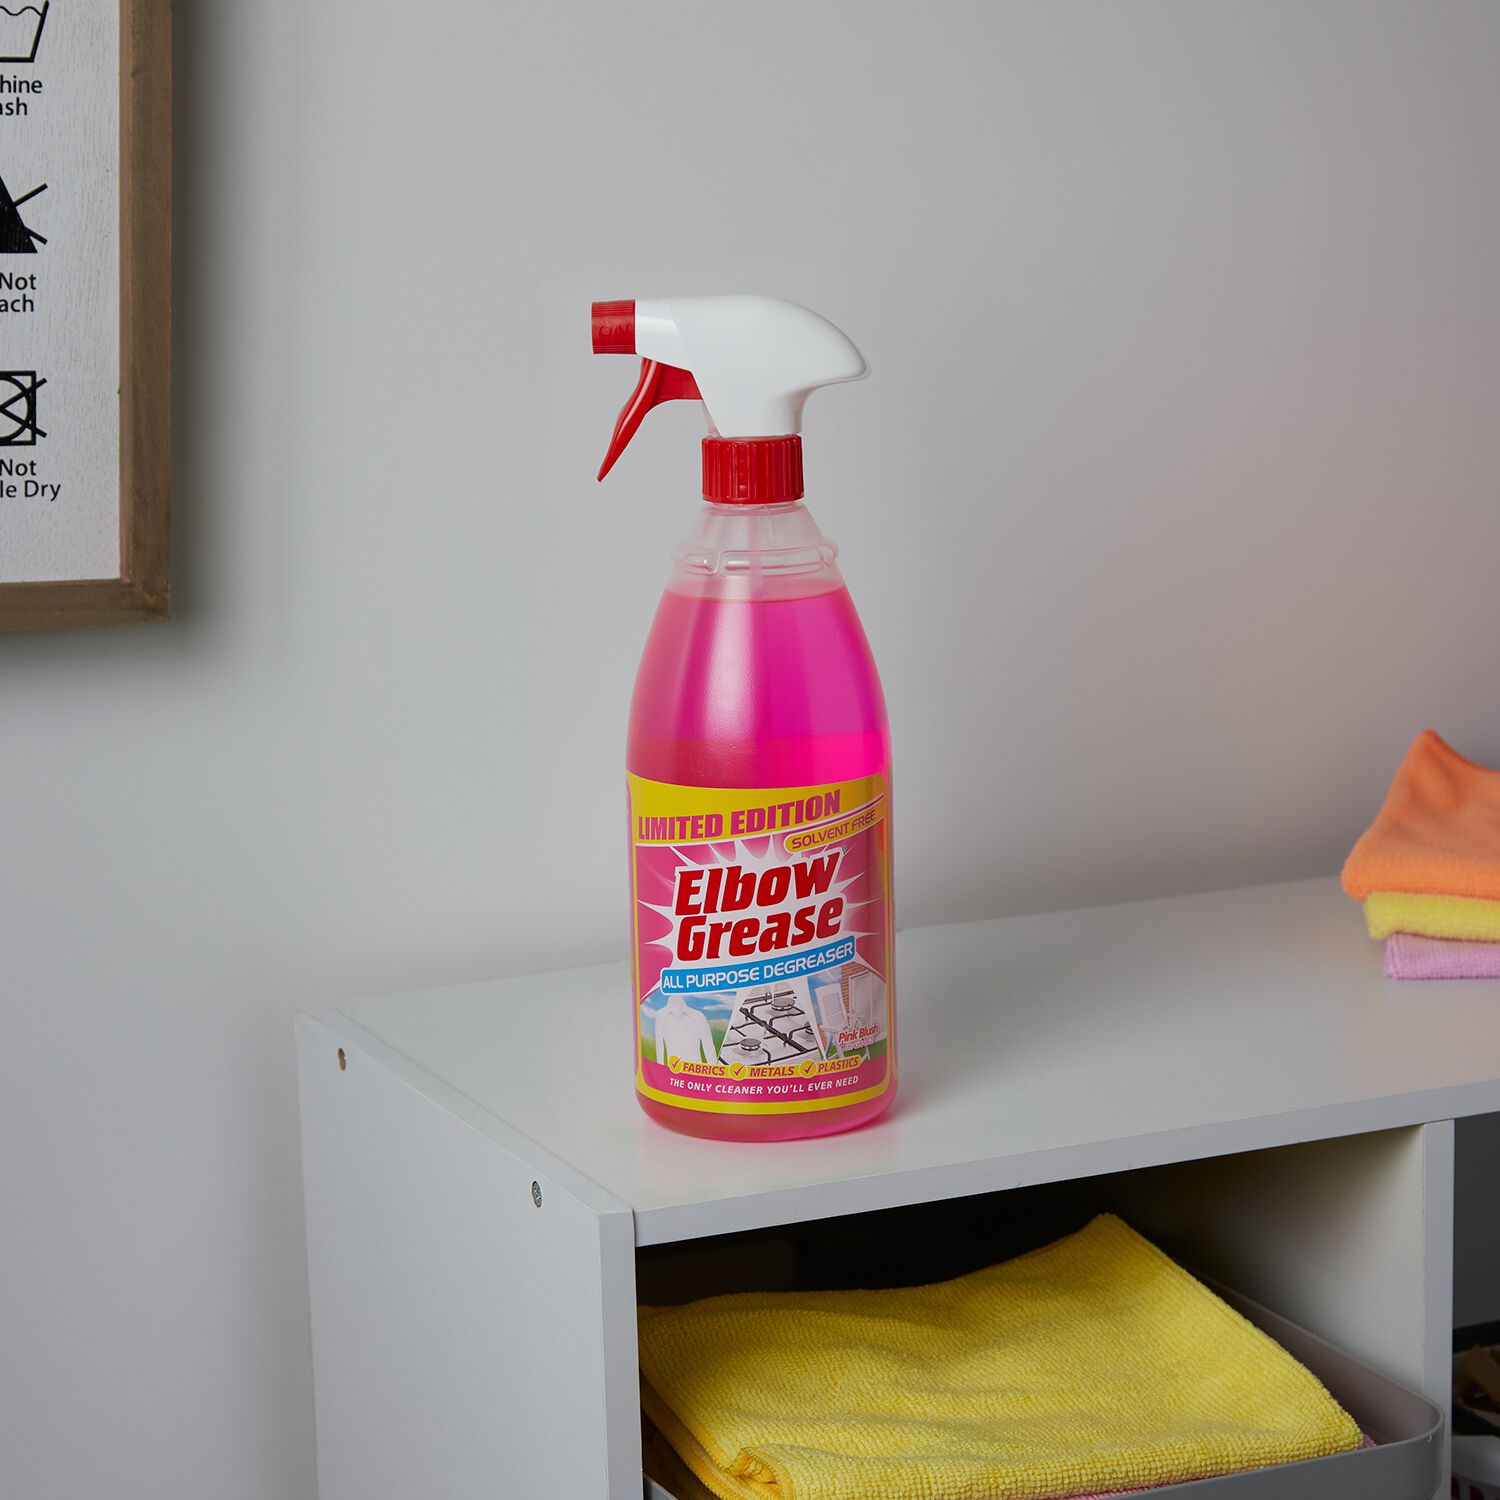 Elbow Grease brings PINK to its brilliant washing-up range